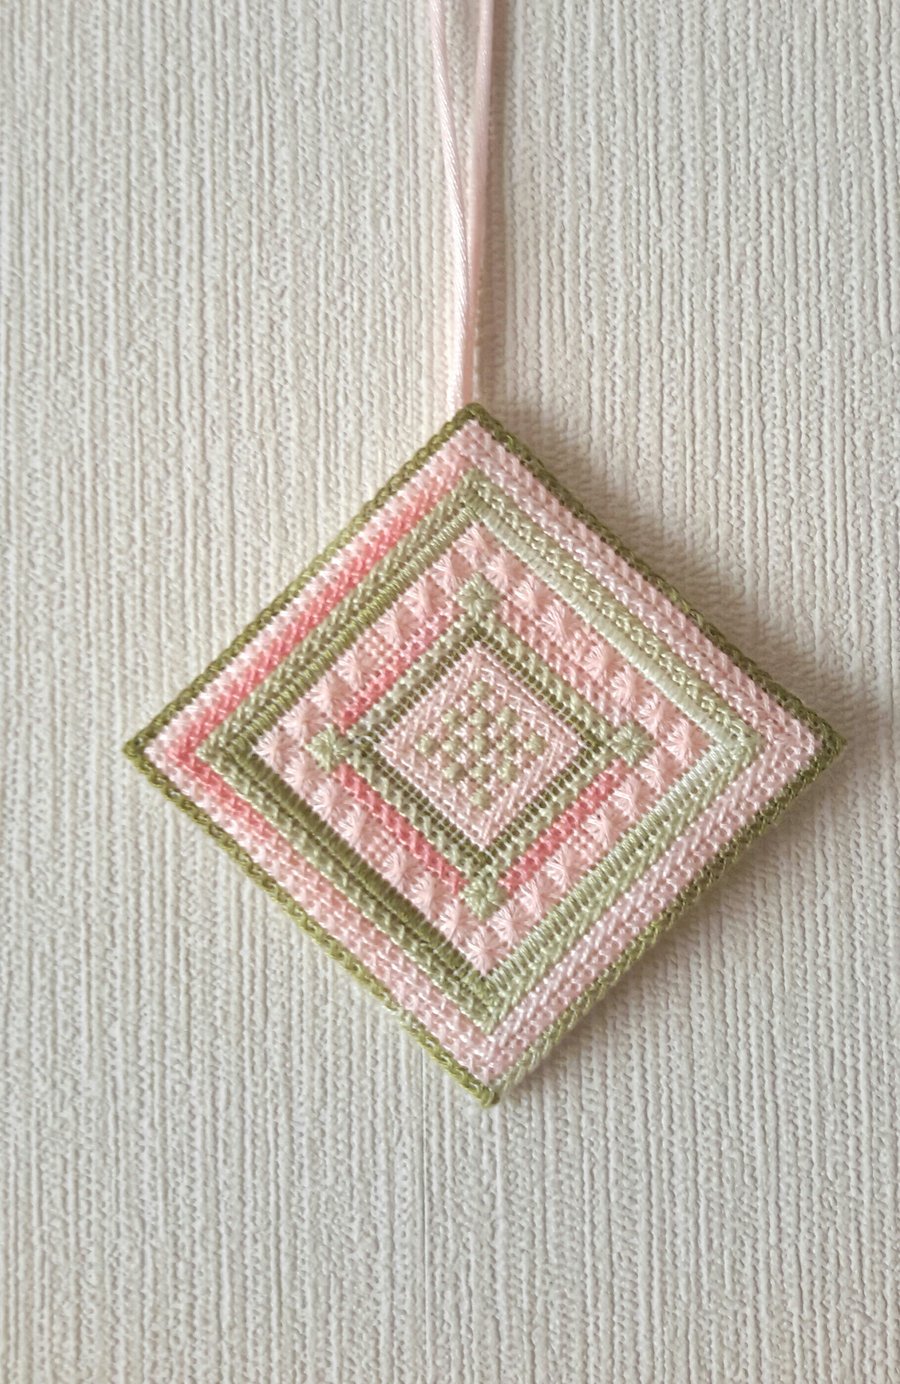 Reduced, Hand Embroidered Needlepoint Hanging Tile, Single Canvaswork Hanger